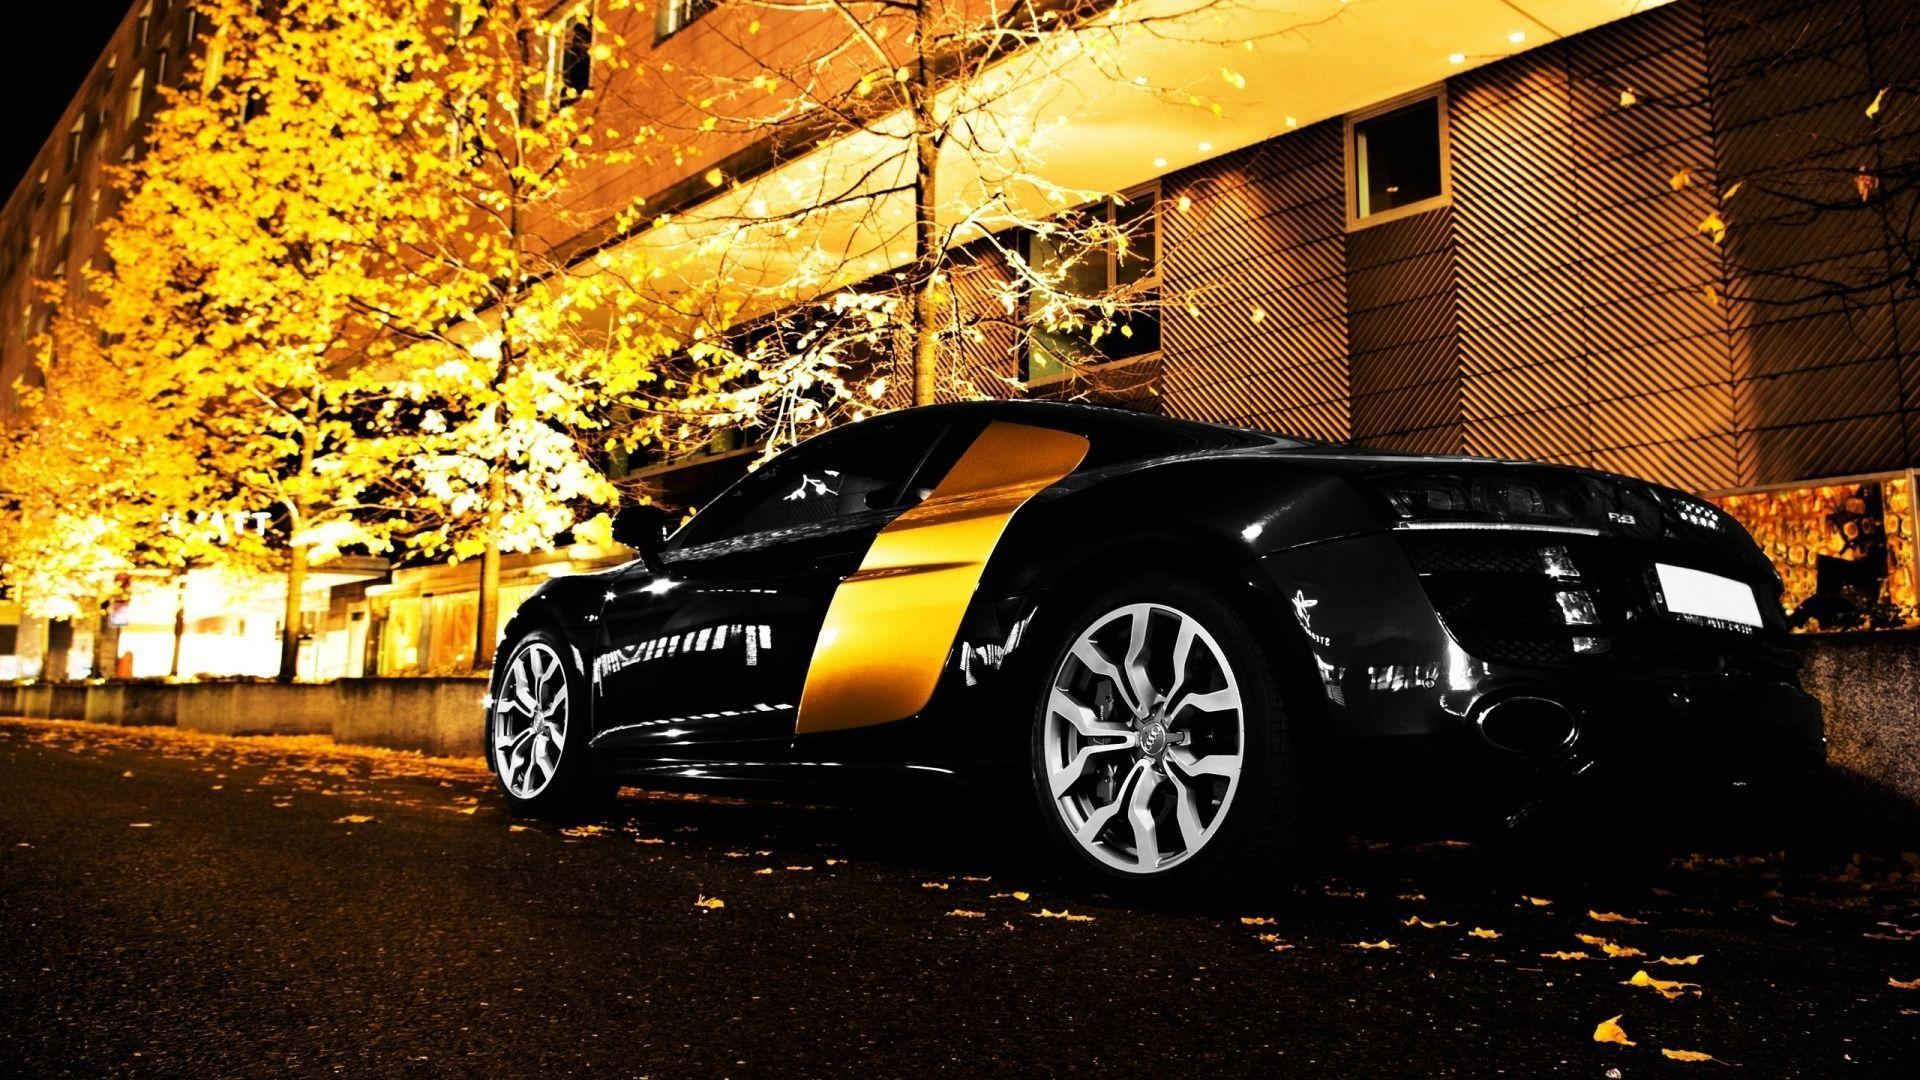 Awesome Audi R8 Sport HD Wallpaper 1080p Cars. Rides I Want